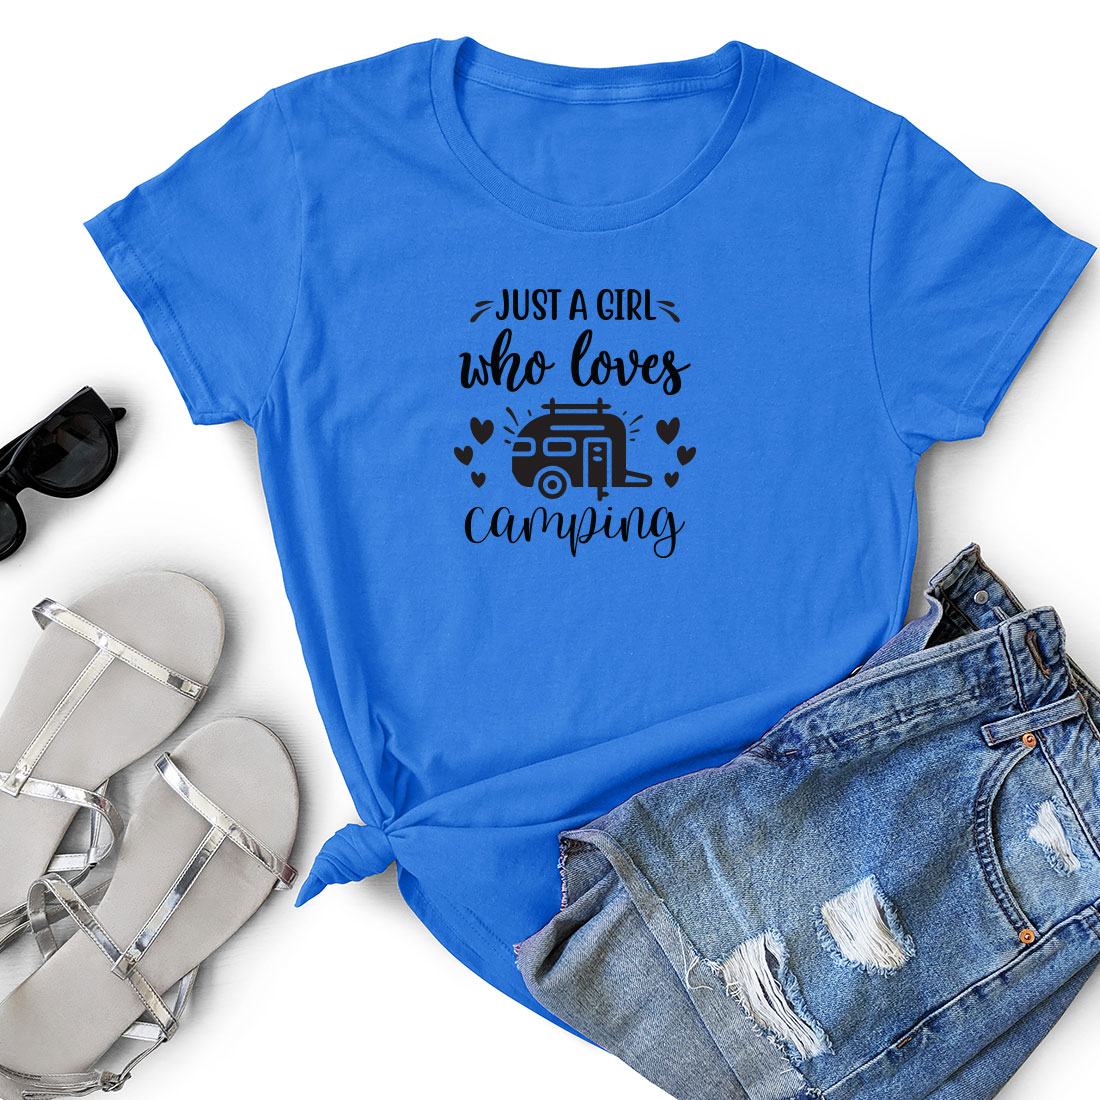 T - shirt that says just a girl who loves camping.